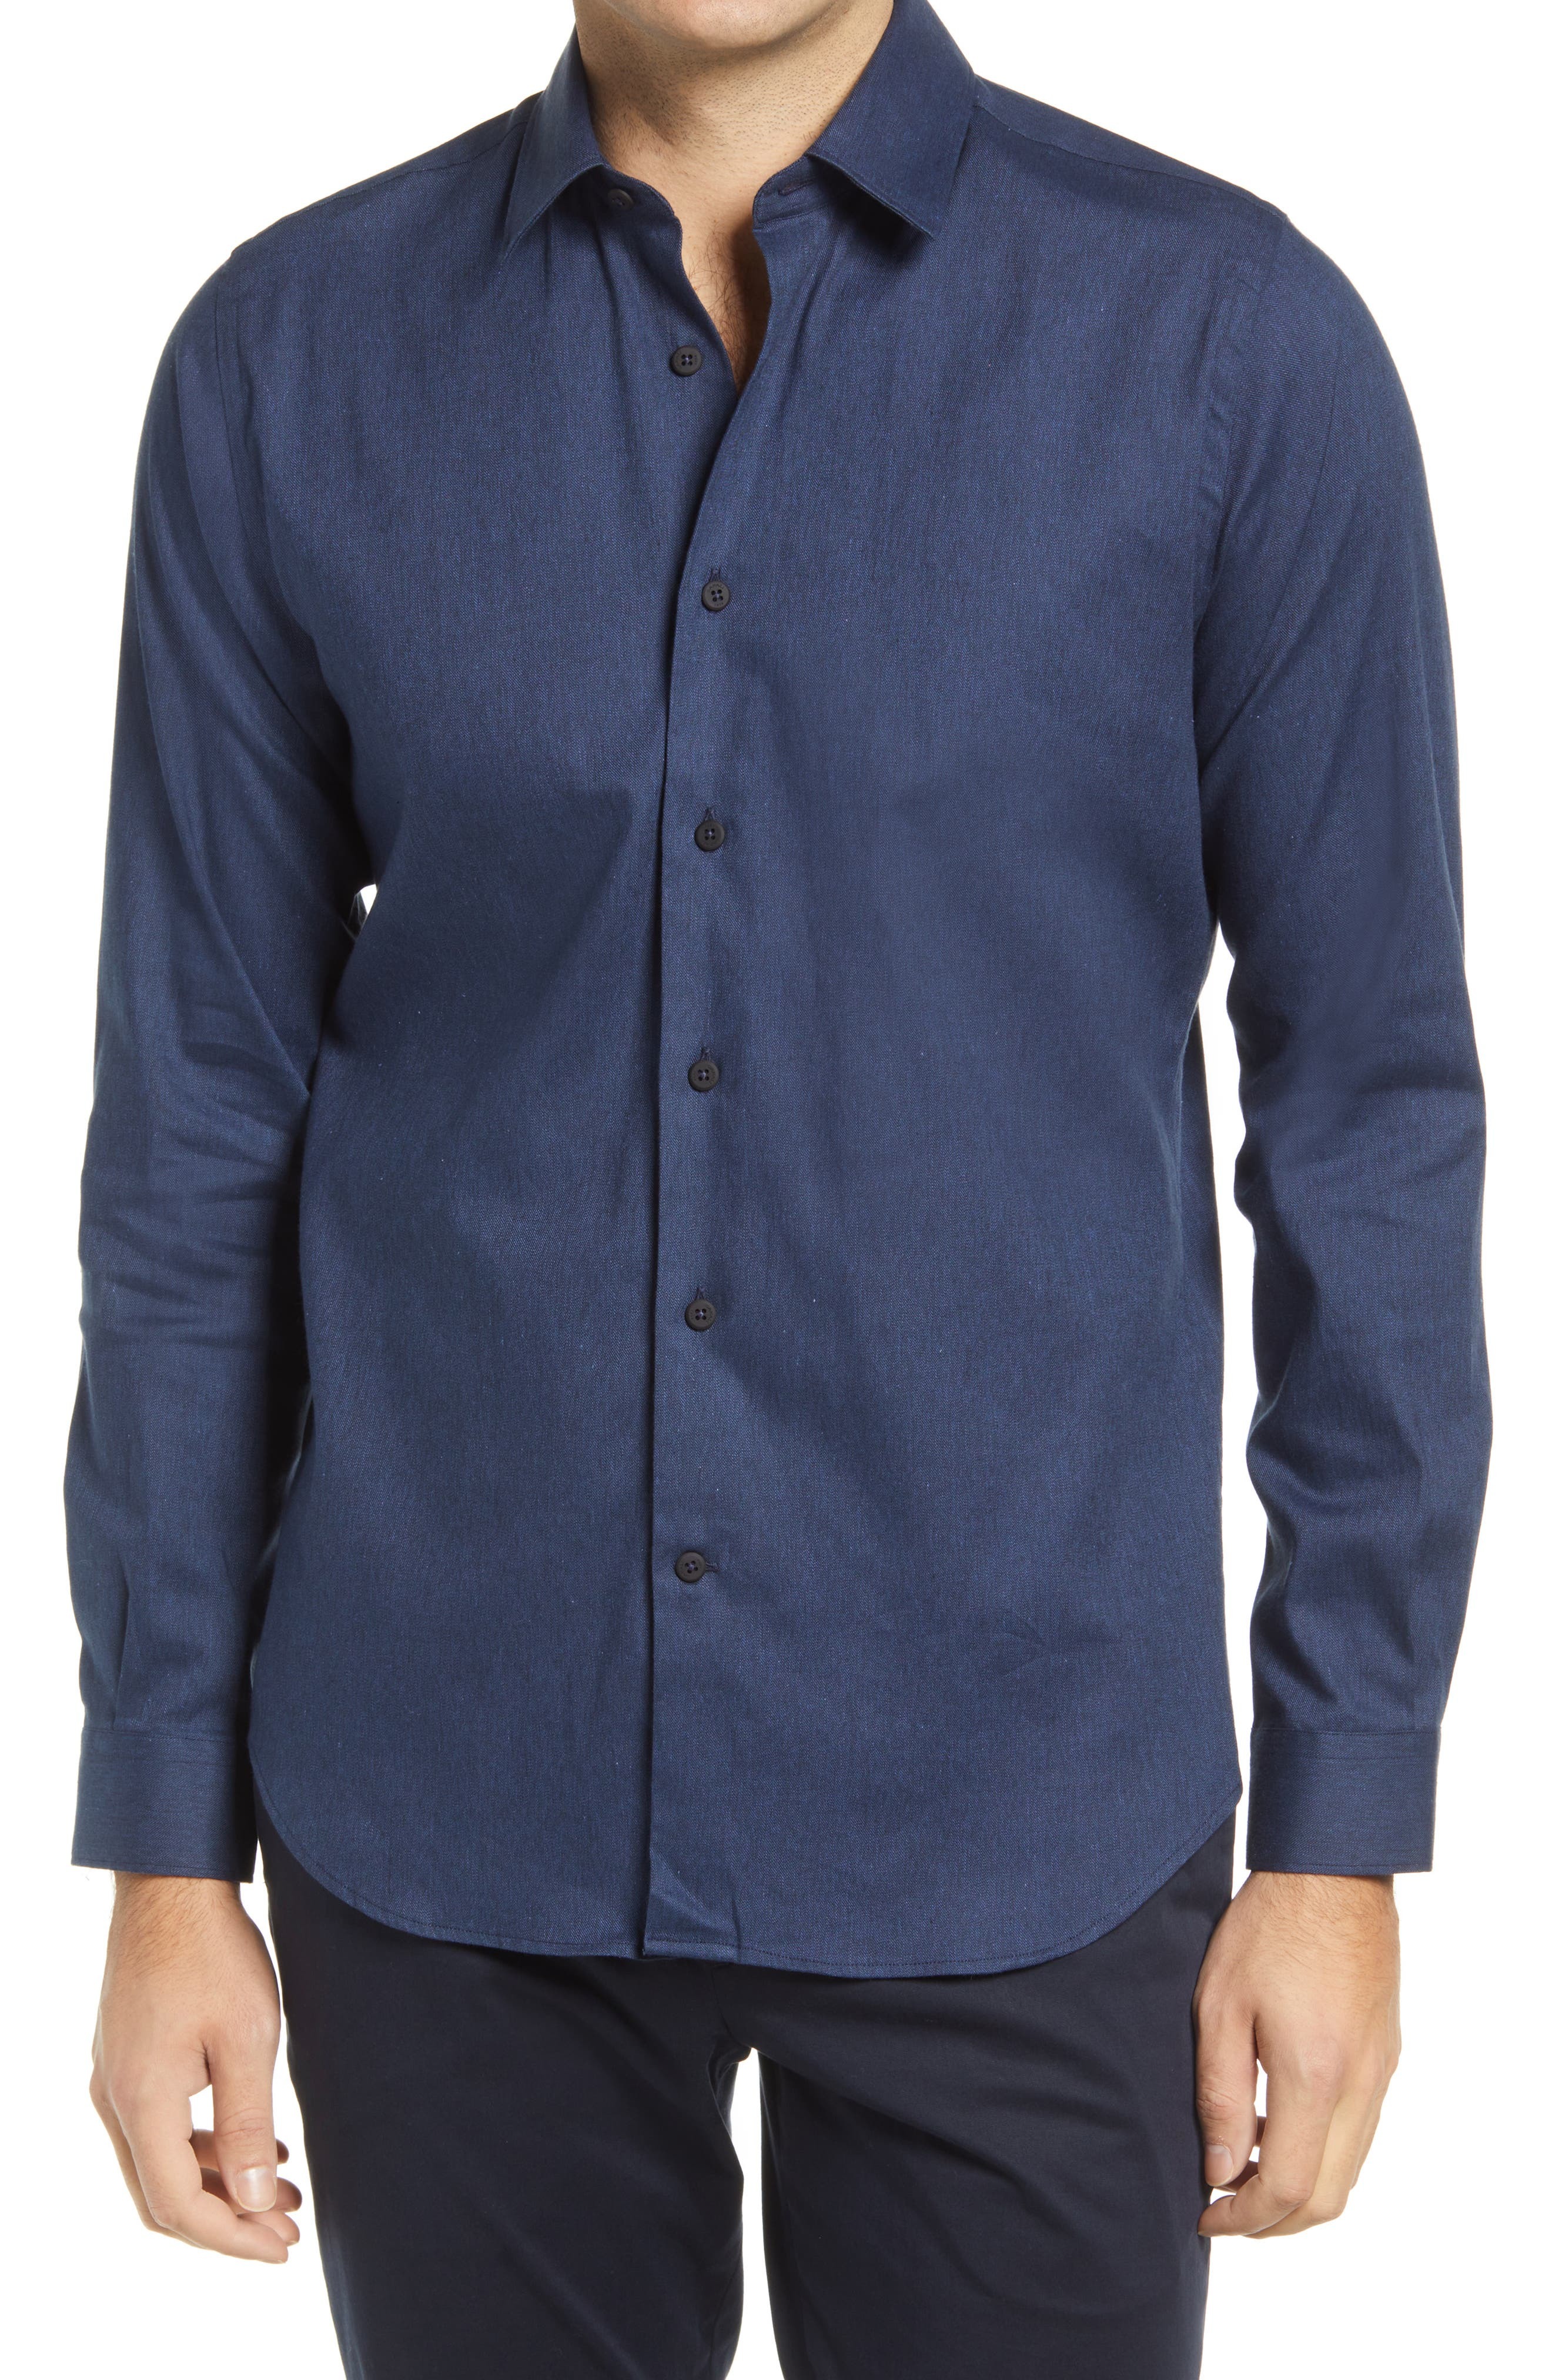 Canali Regular Fit Stretch Cotton Button Up Shirt, $176 | Nordstrom ...